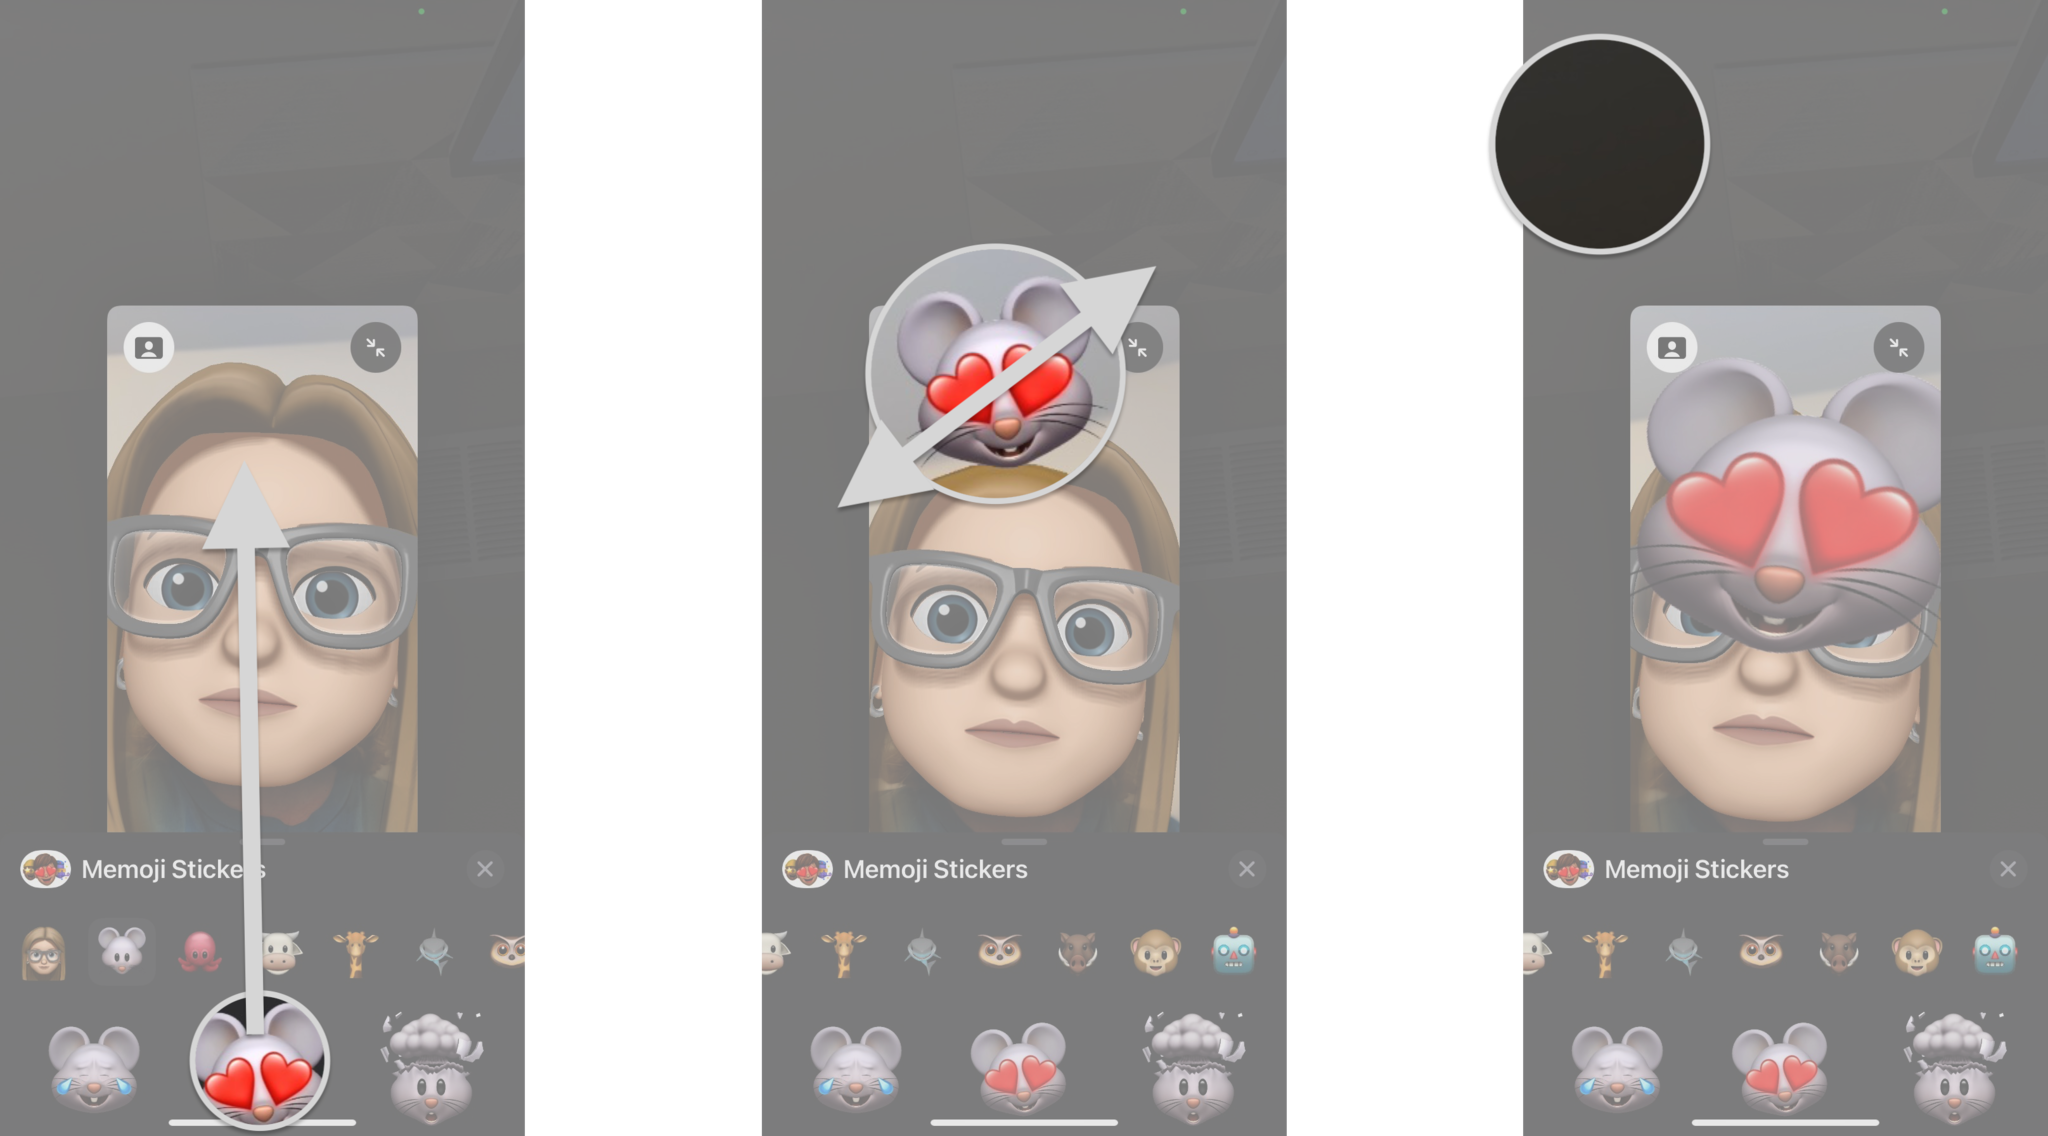 How to use FaceTime stickers on the iPhone by showing steps: Hold your finger on a sticker and drag it to your live view, Pinch to zoom in and out, Tap outside of your live view to return to your FaceTime call